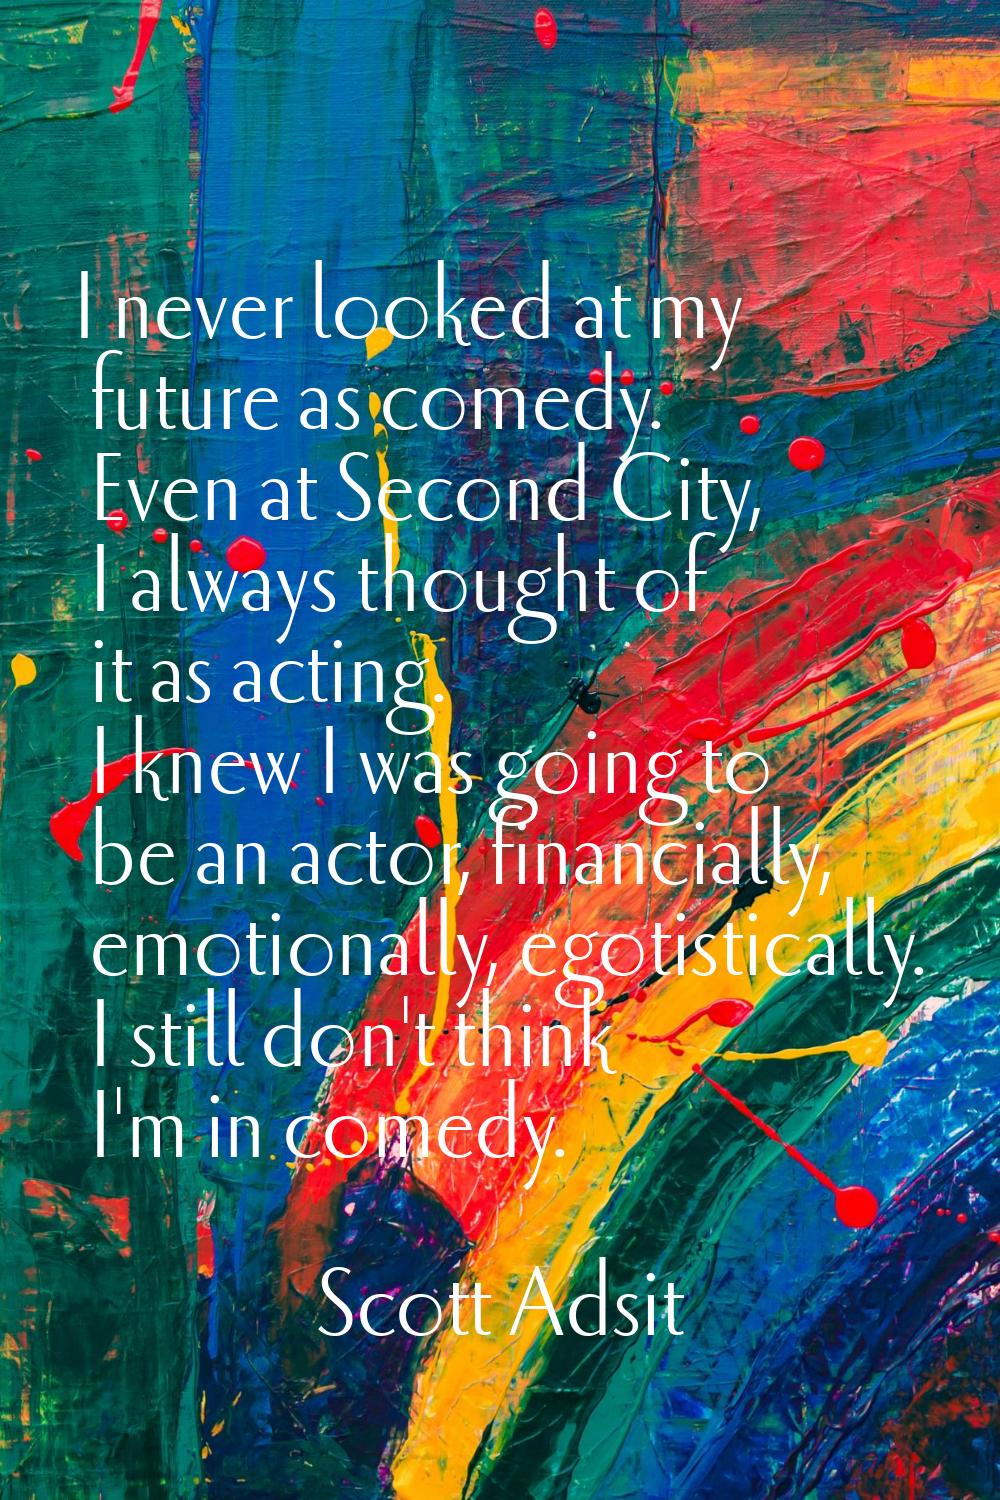 I never looked at my future as comedy. Even at Second City, I always thought of it as acting. I kne